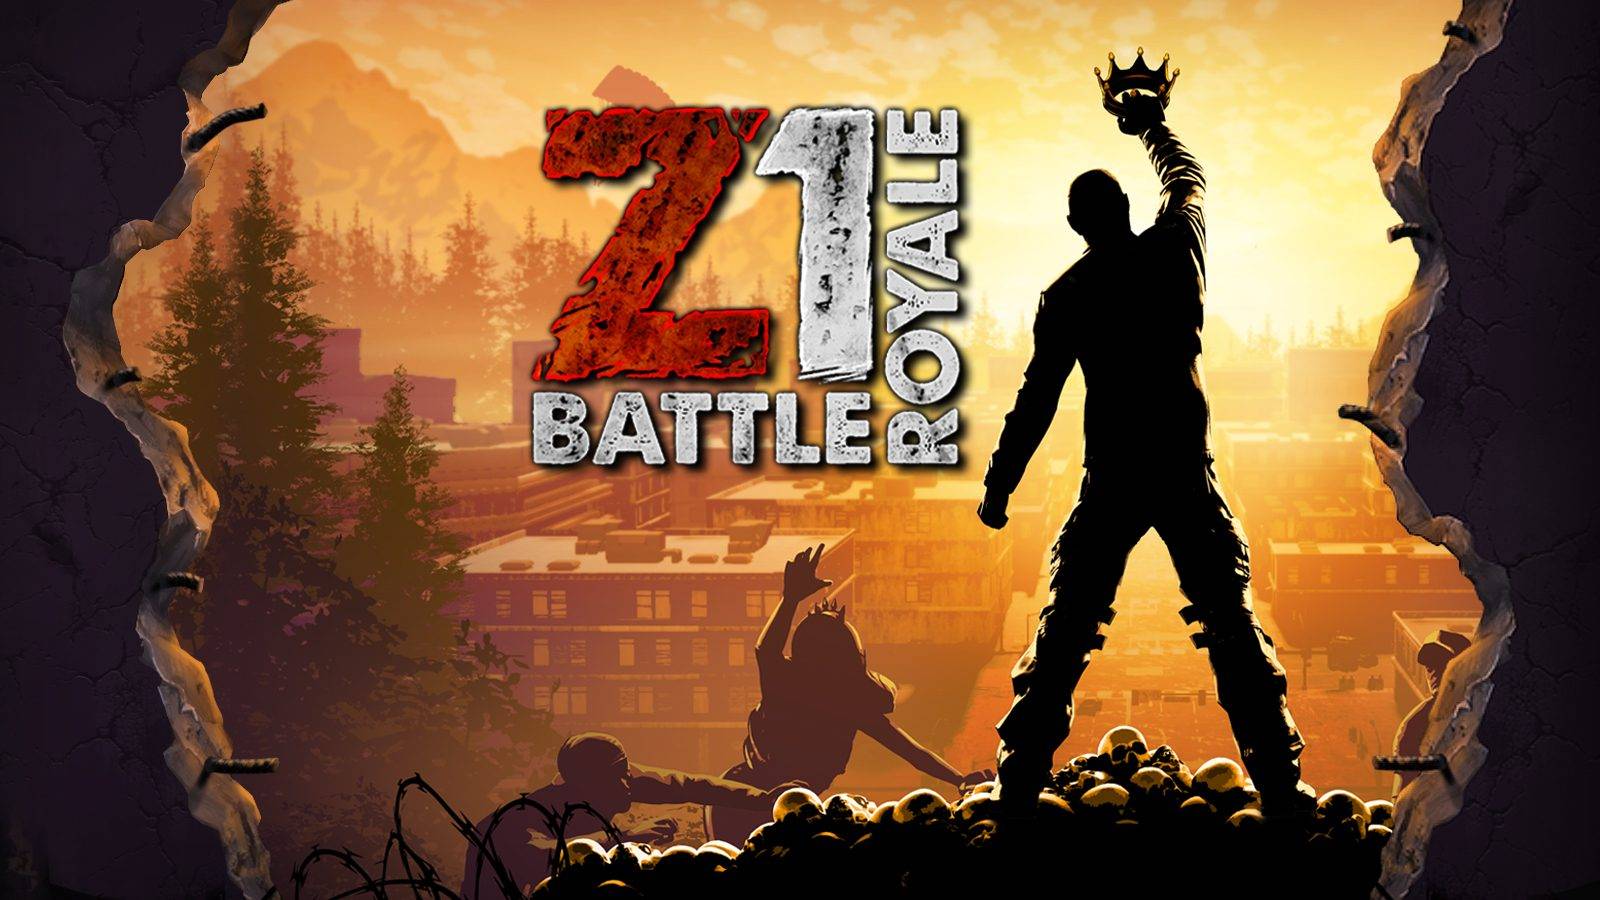 H1Z1’s name changes to Z1 Battle Royale